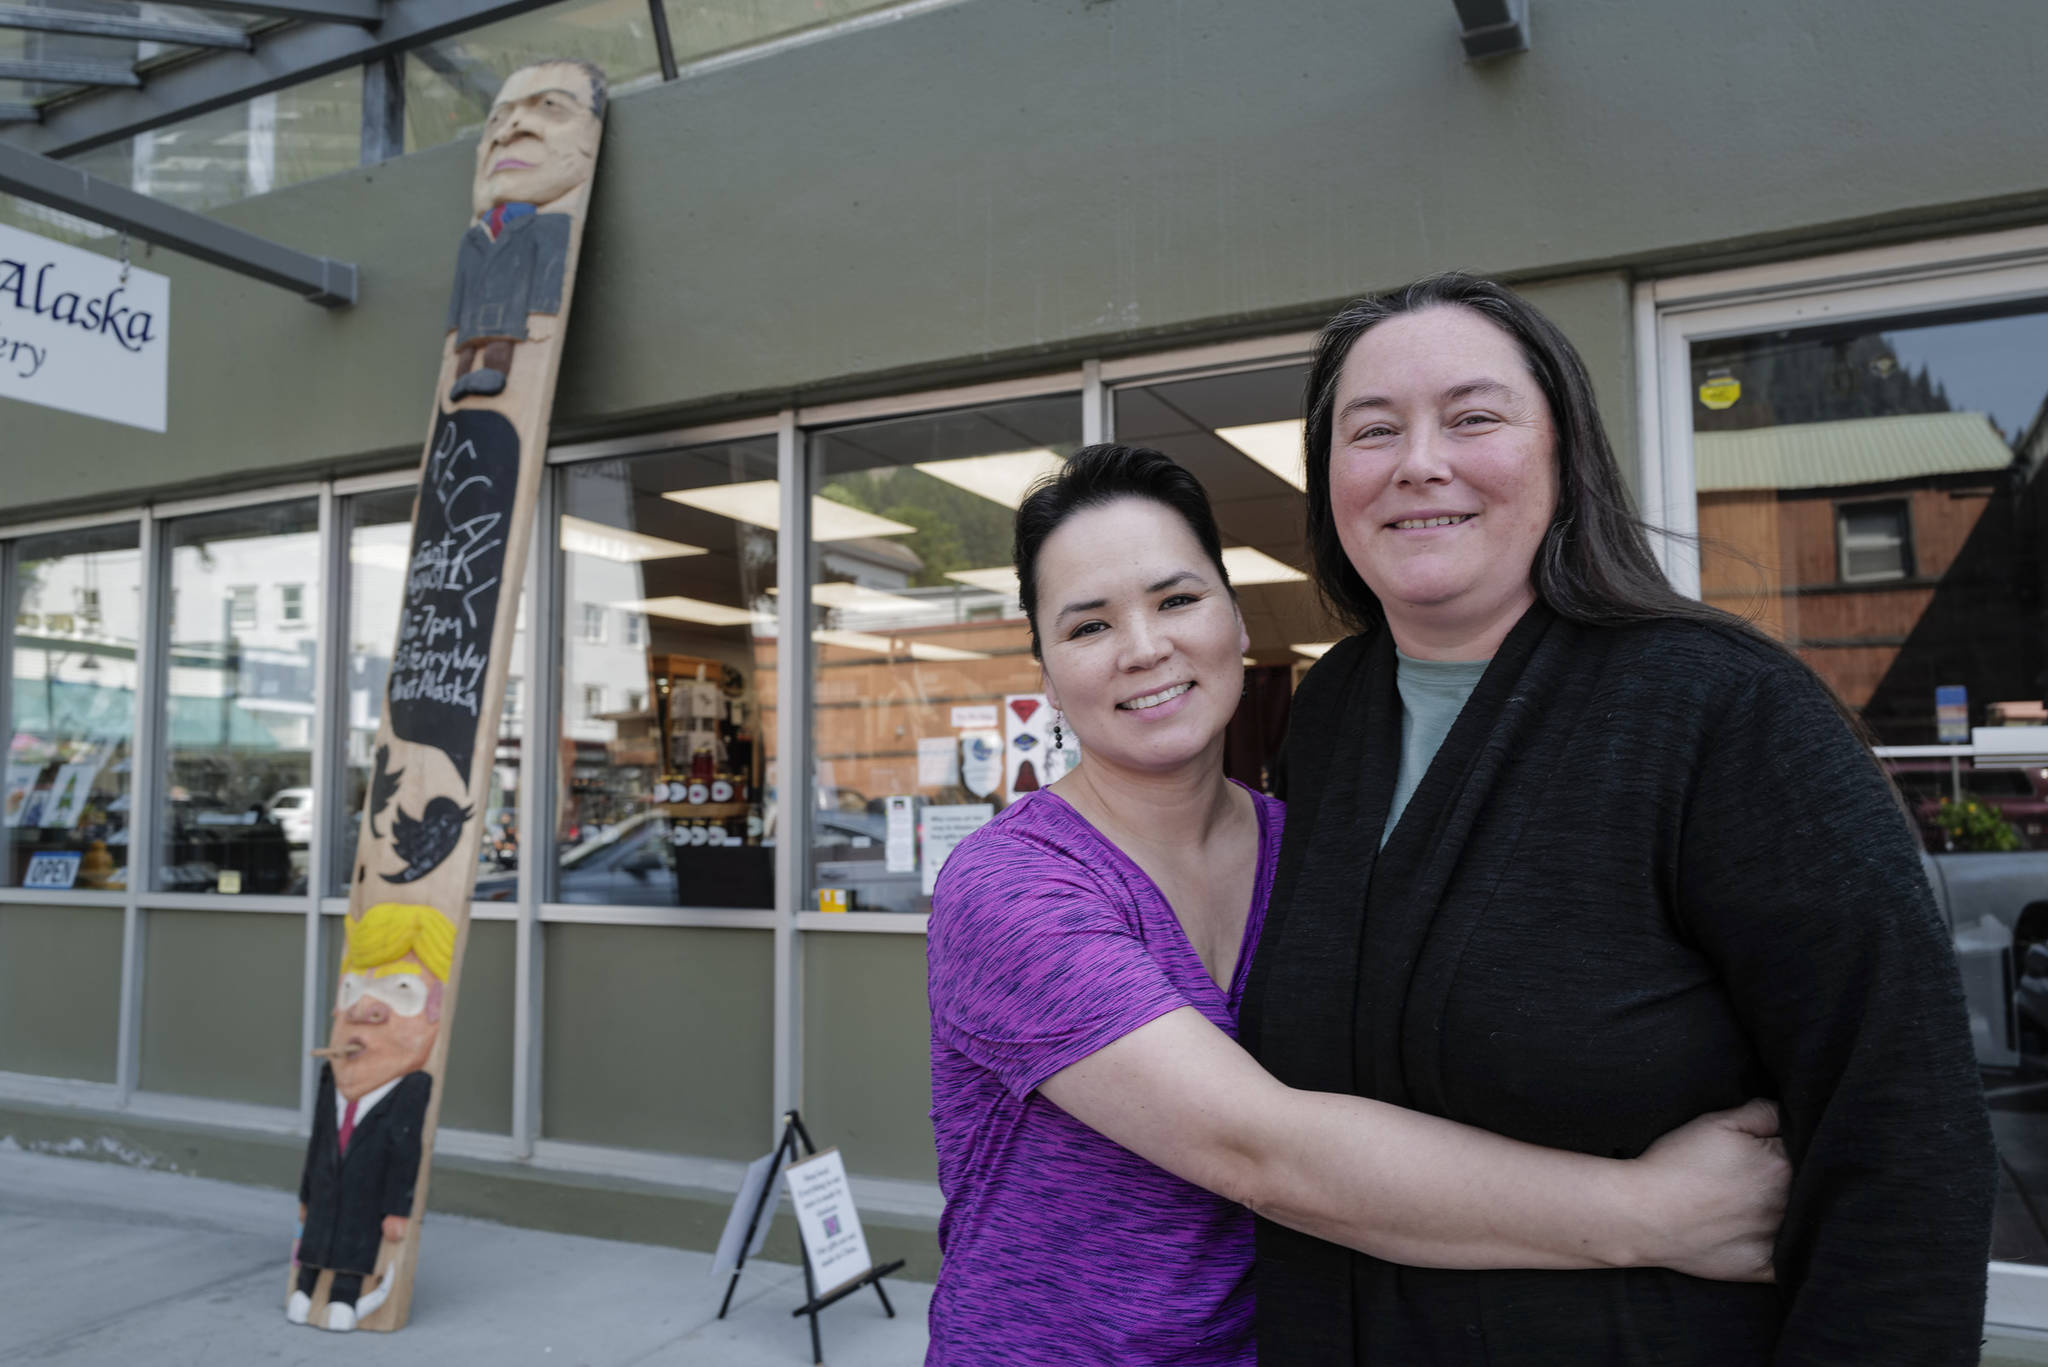 Co-owners Aakatchaq Schaeffer, left, and Vivian Mork Yéilk’ stand in front of their Planet Alaska Gallery with a ridicule pole carved by Sitka artist Tommy Joseph on Wednesday, July 31, 2019. The pole includes likenesses of Alaska Gov. Mike Dunleavy, top, and President Donald Trump. (Michael Penn | Juneau Empire)